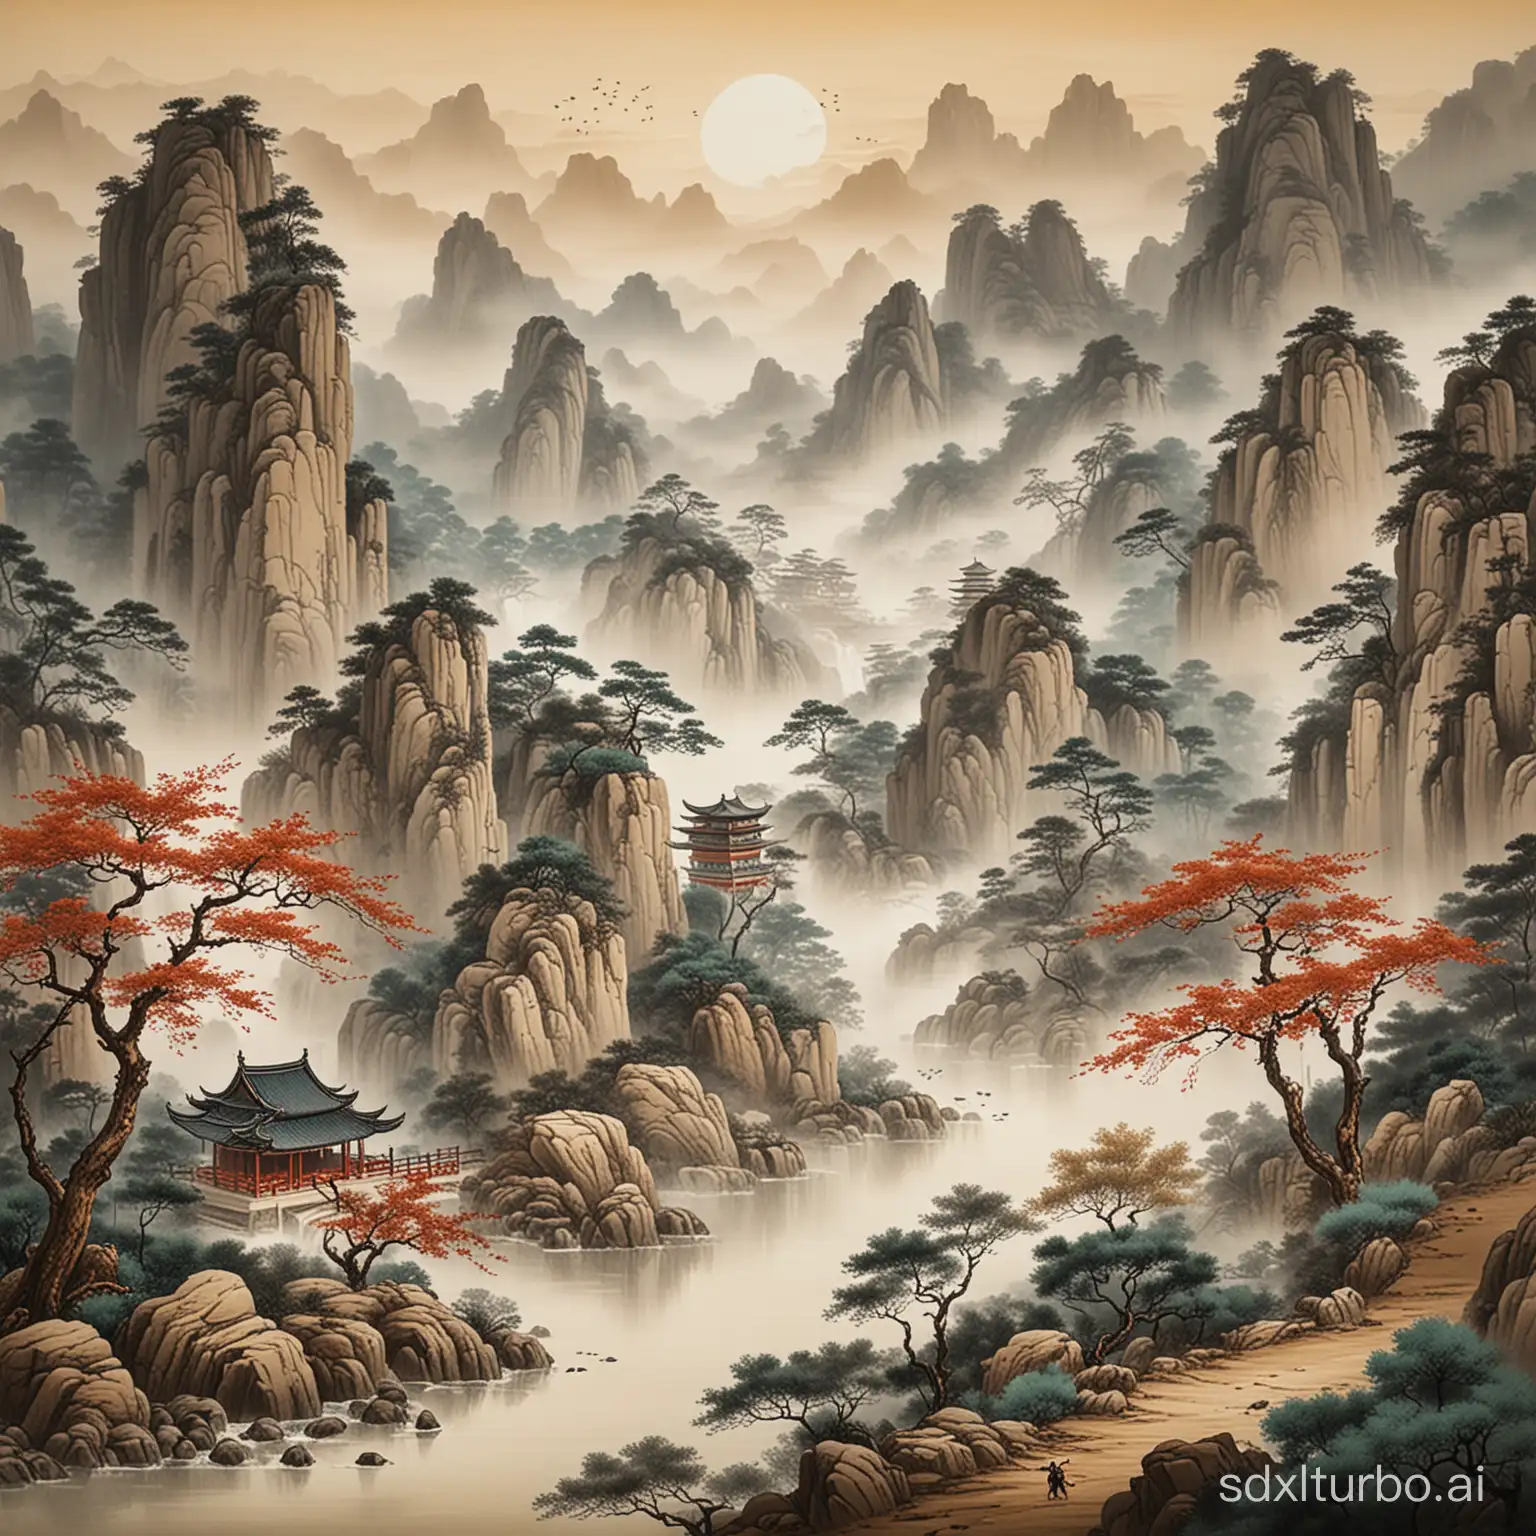 Chinese-style landscape painting